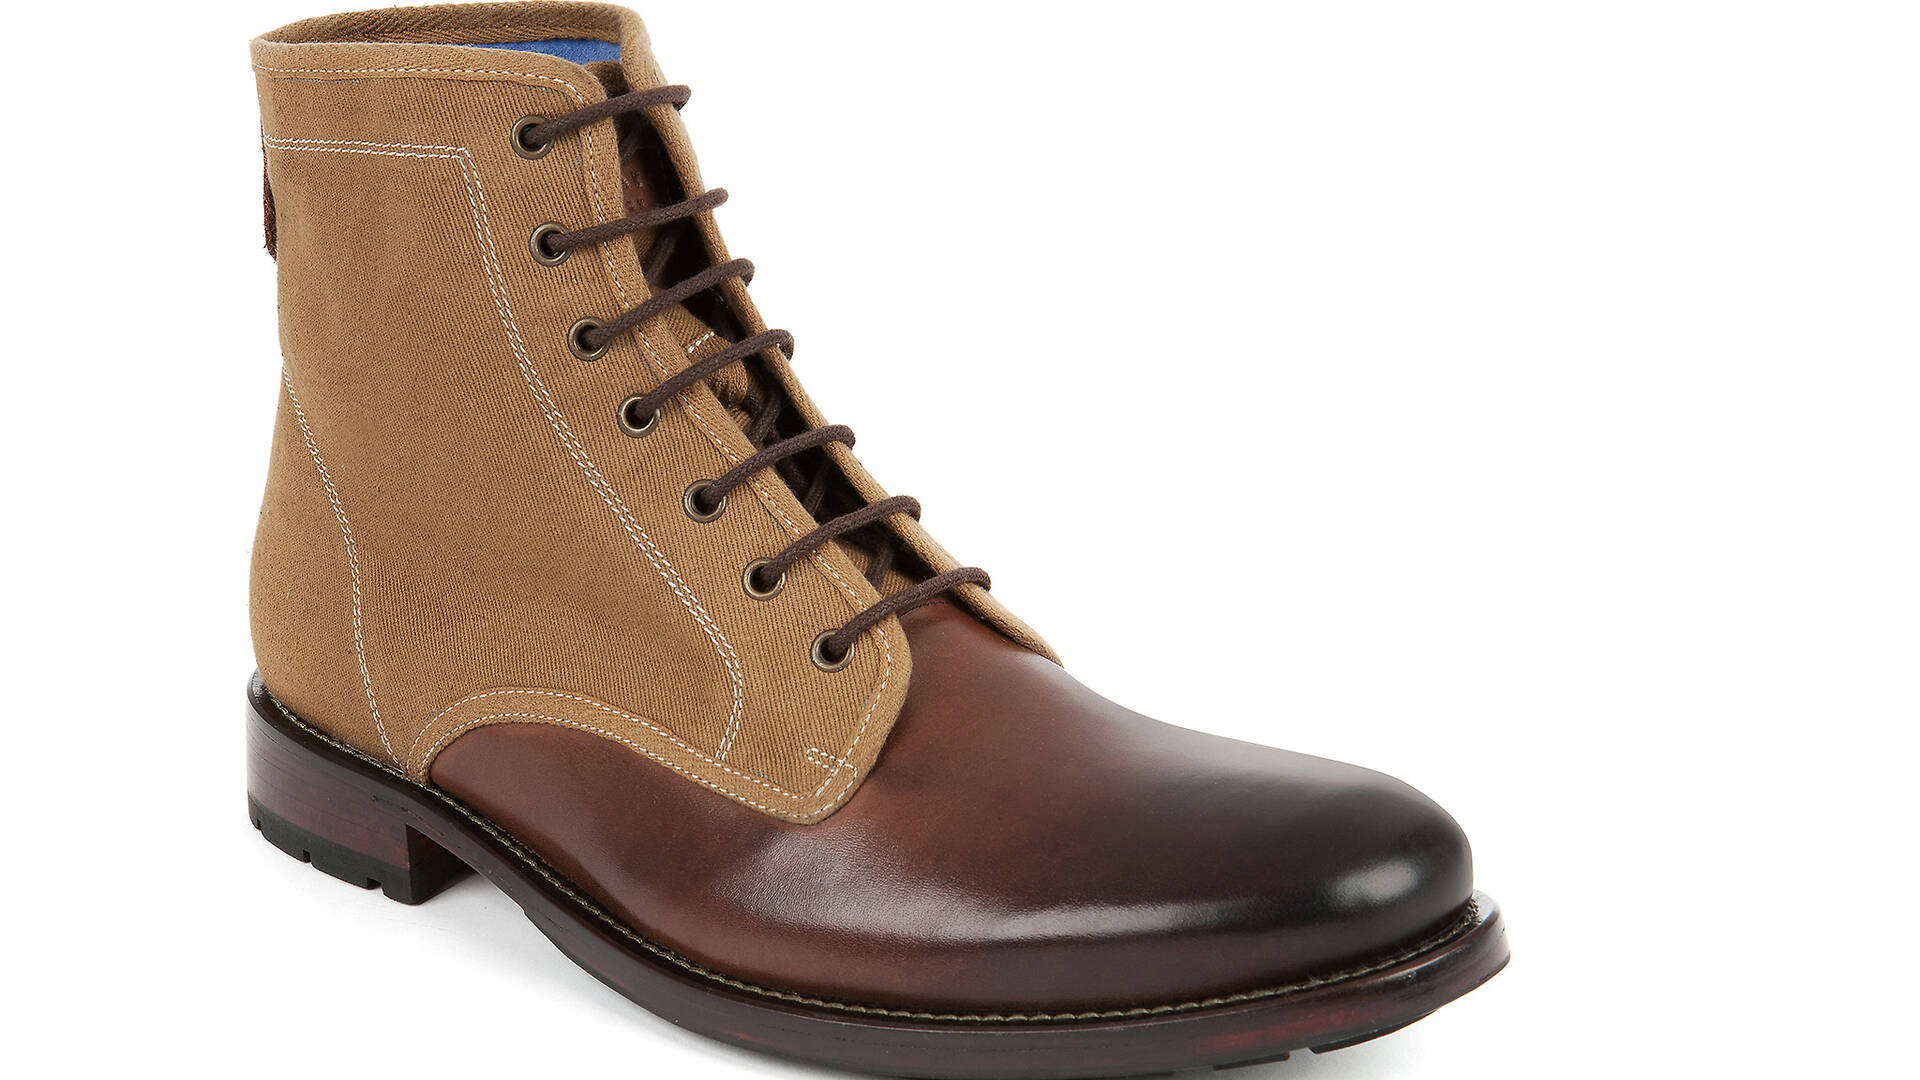 Best shoes for men for fall 2013: Chukka, lace-up, Chelsea and hiking boots